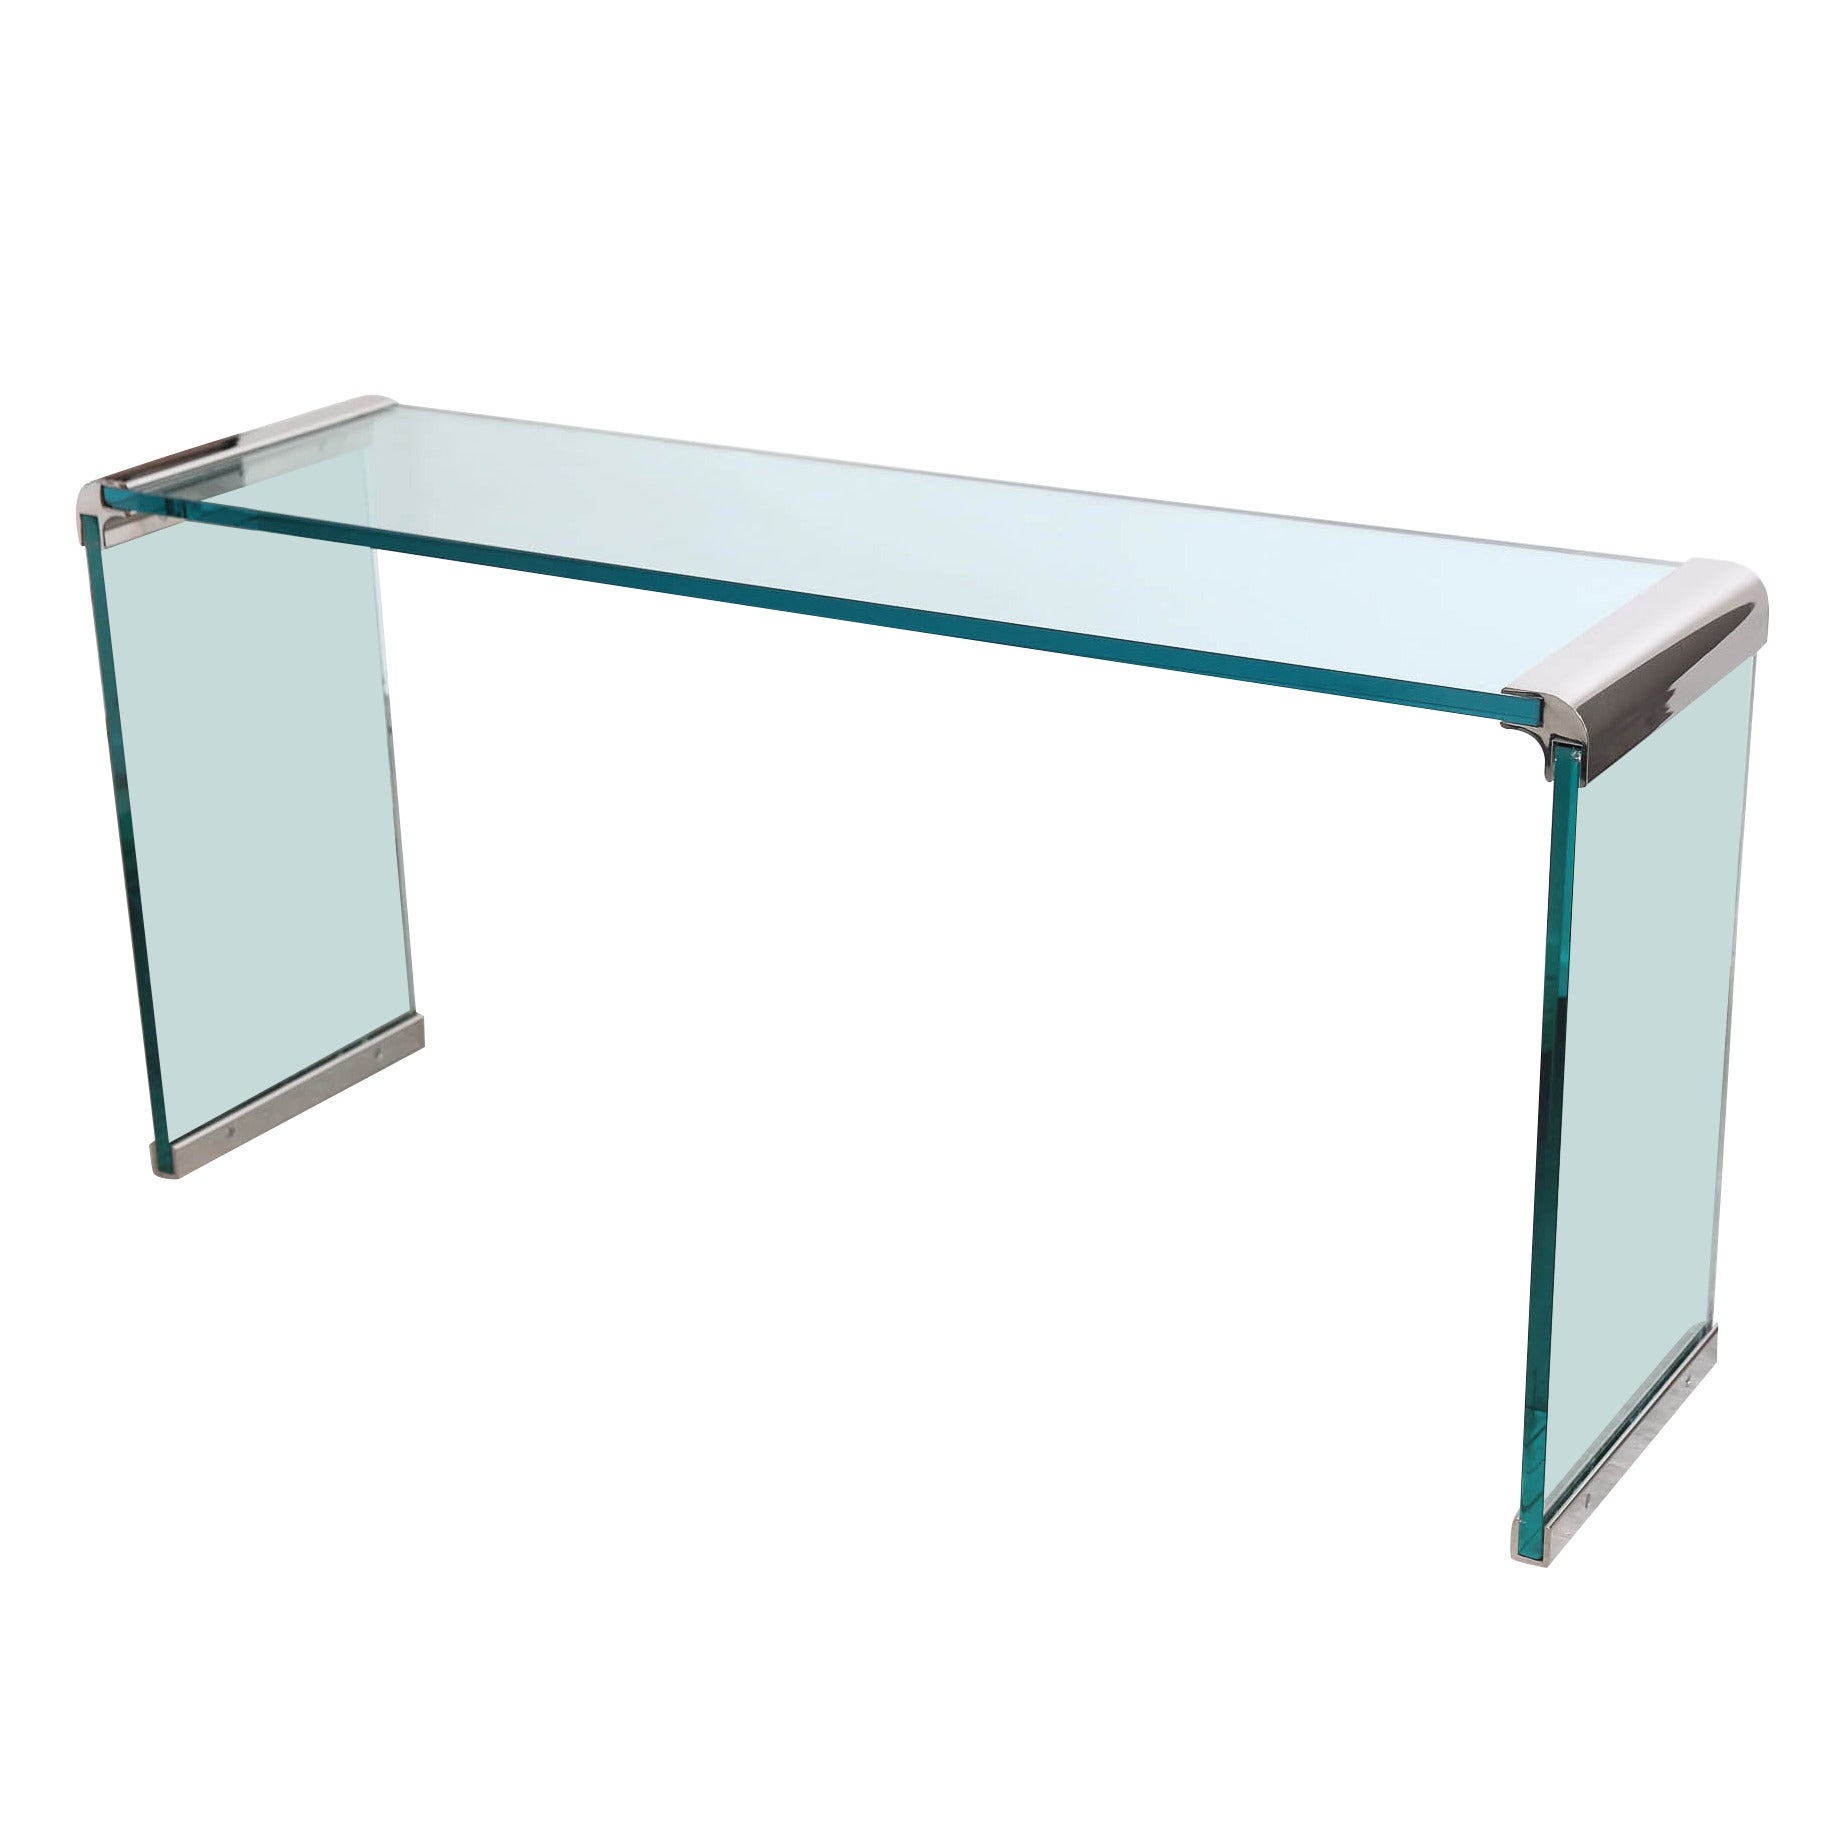 Pace Waterfall Double Chrome Bar and Glass Console Table